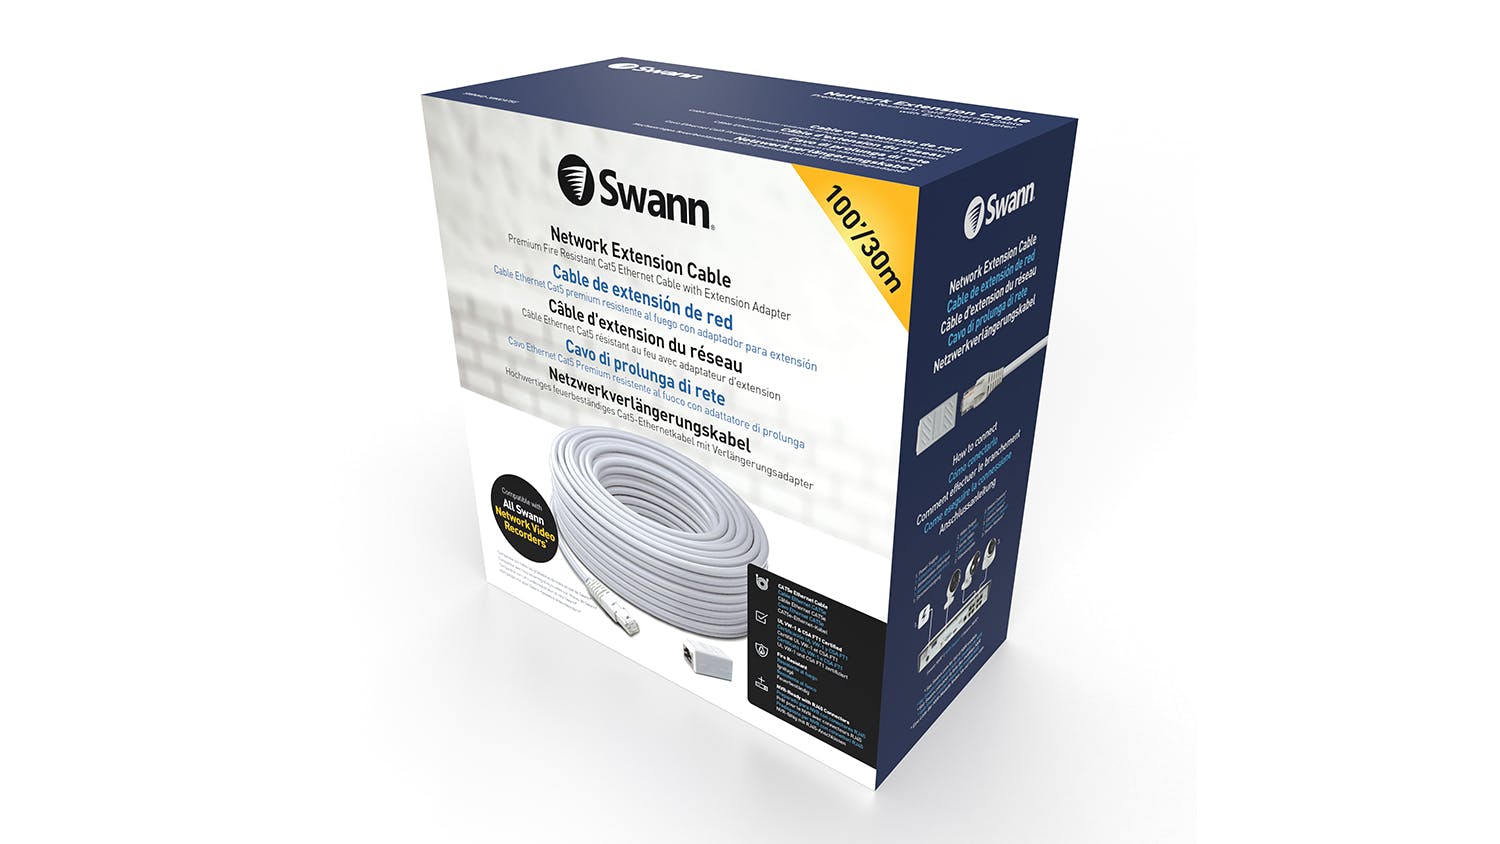 Swann UL Rated 30m CAT5e Extension Cable with Extension Adapter